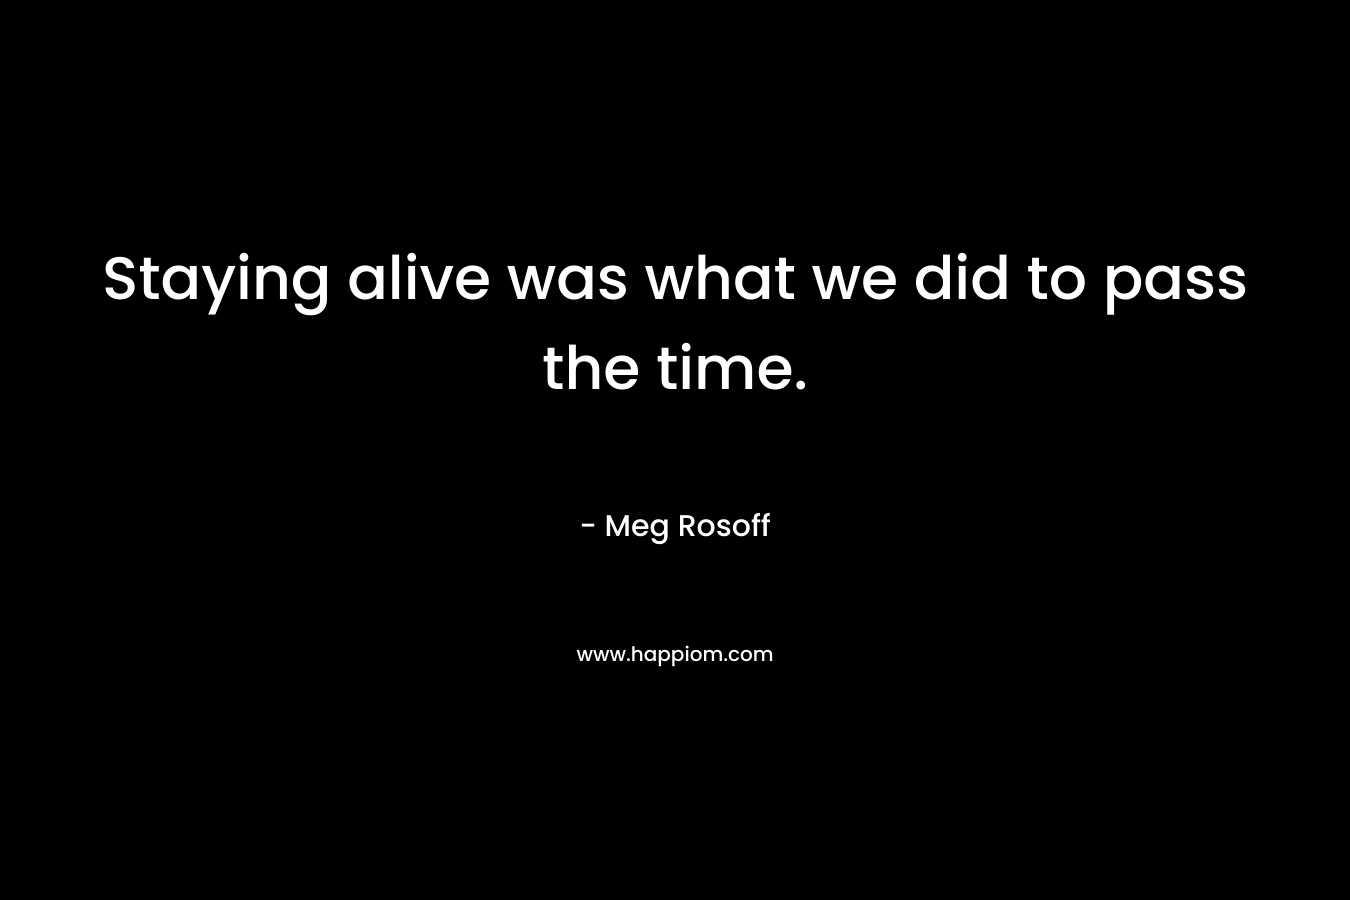 Staying alive was what we did to pass the time. – Meg Rosoff